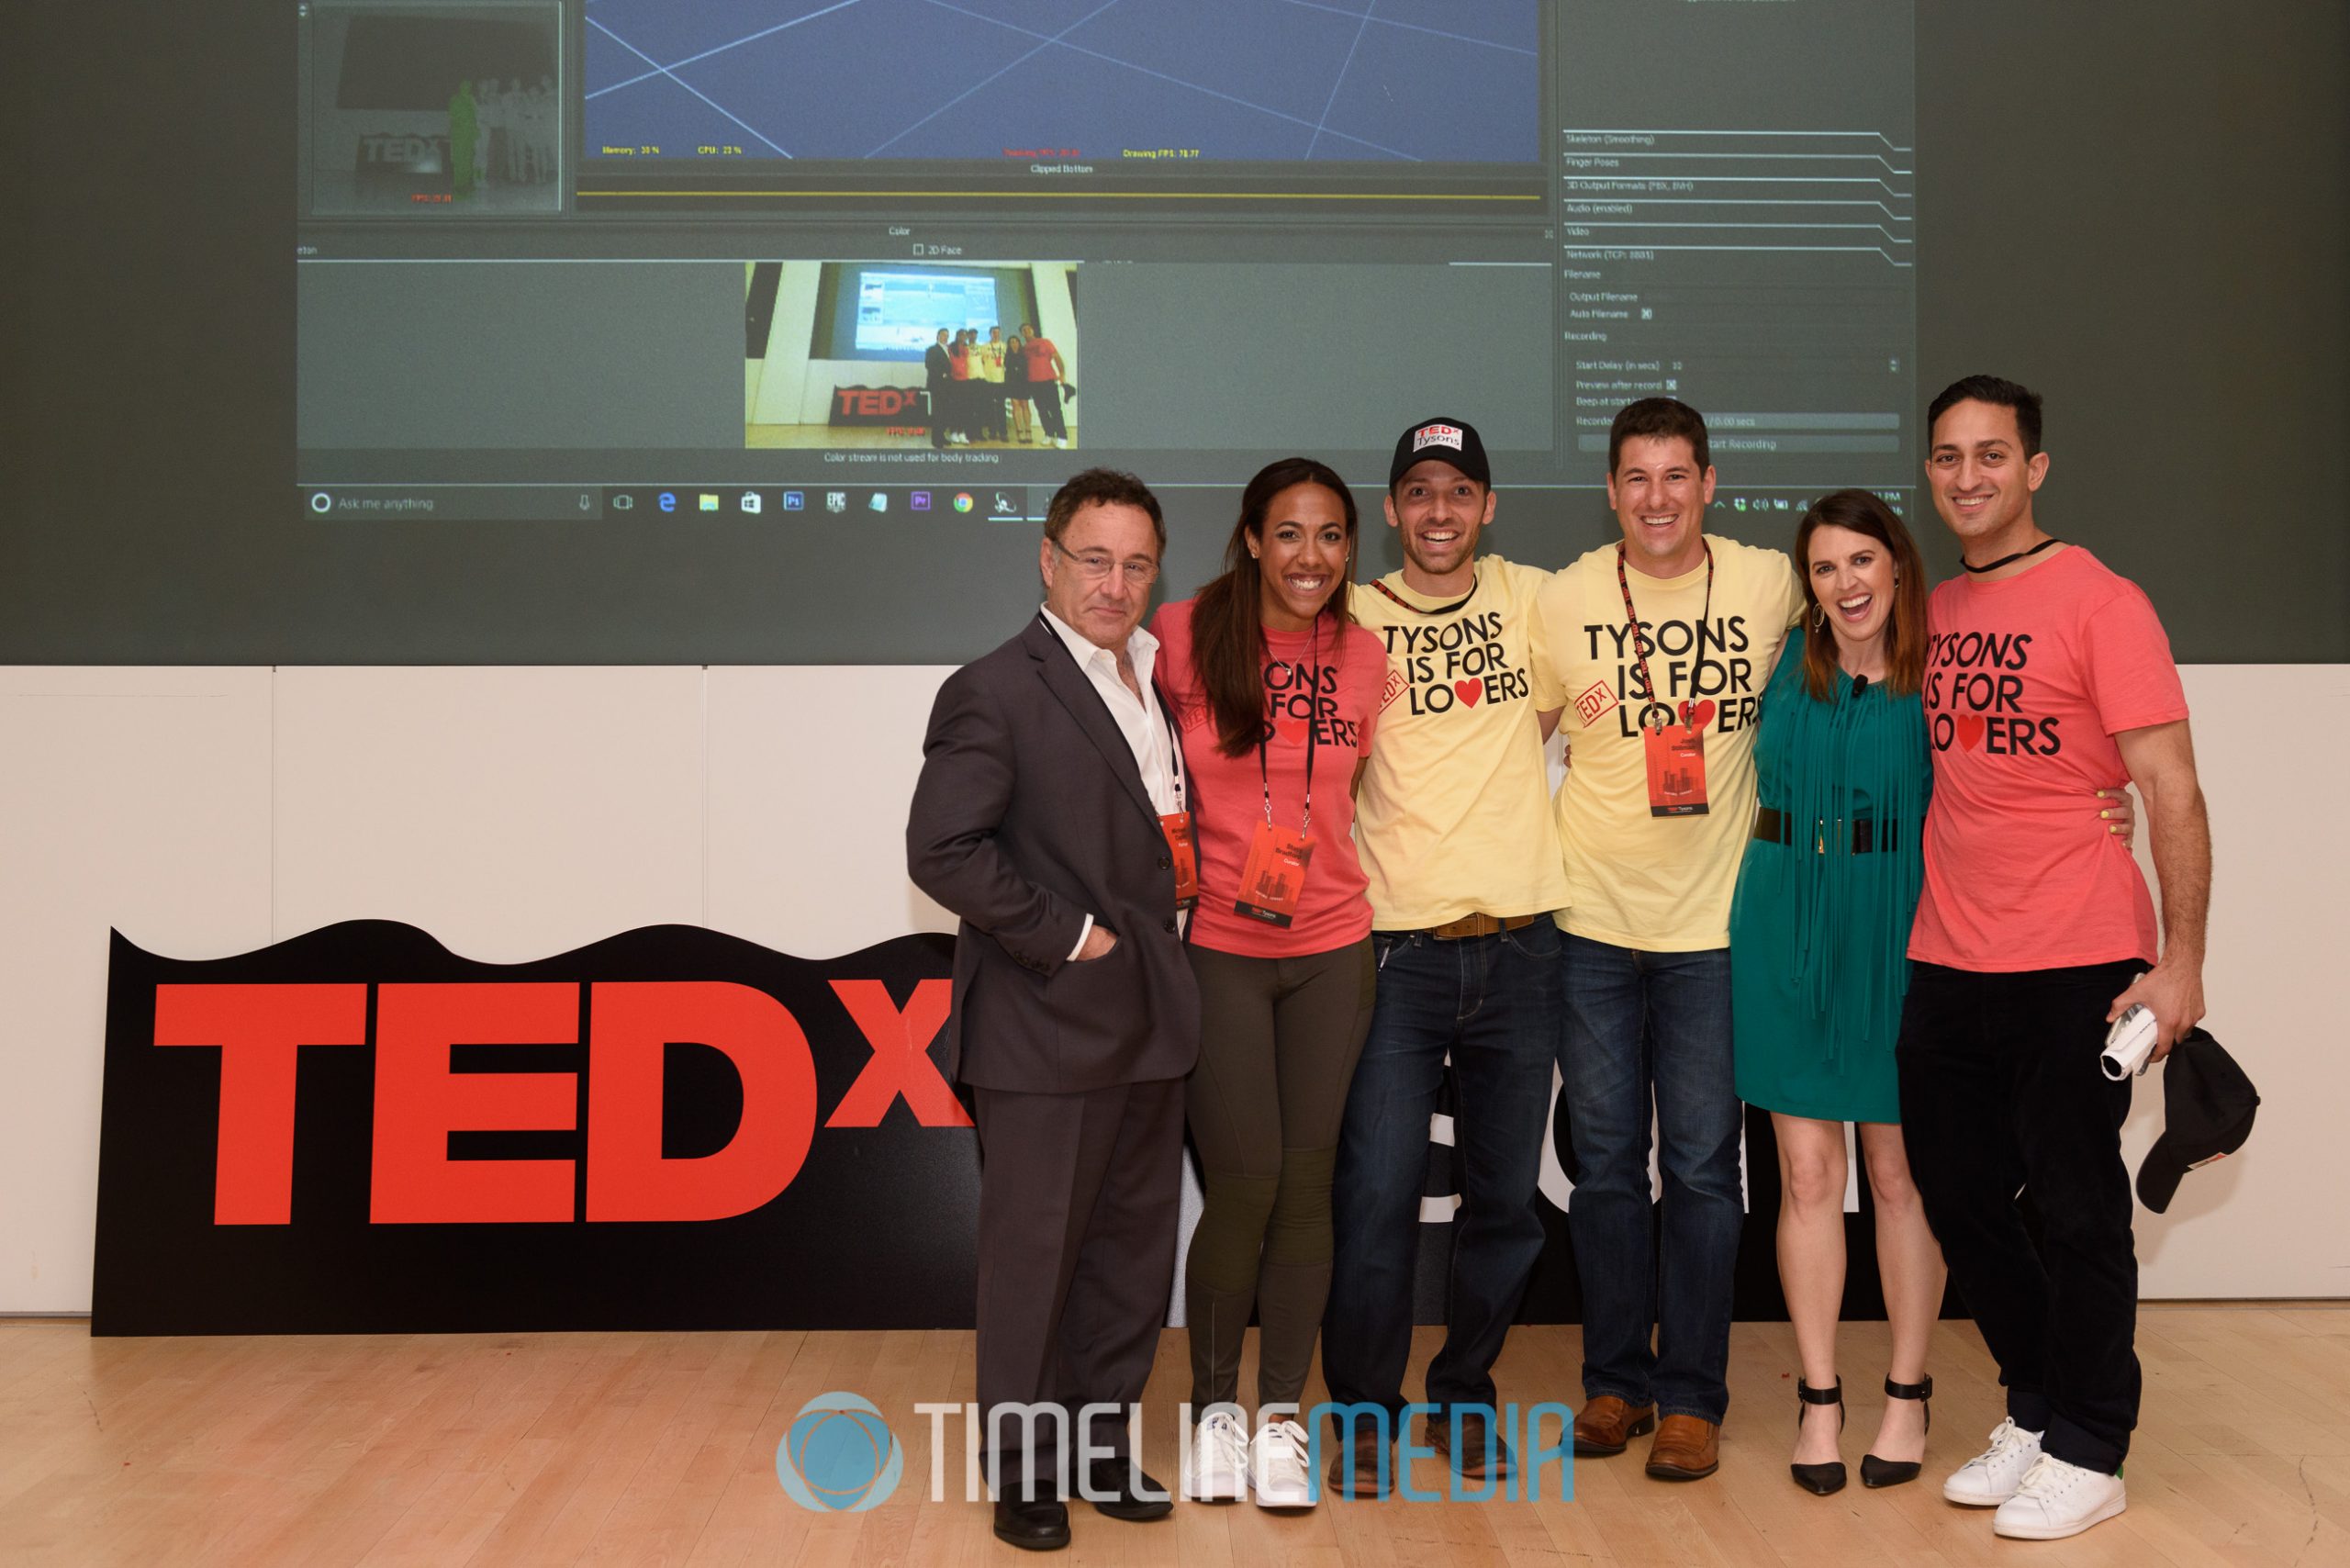 TEDxTysons - Future Tense organizers, and sponsors ©TimeLine Media